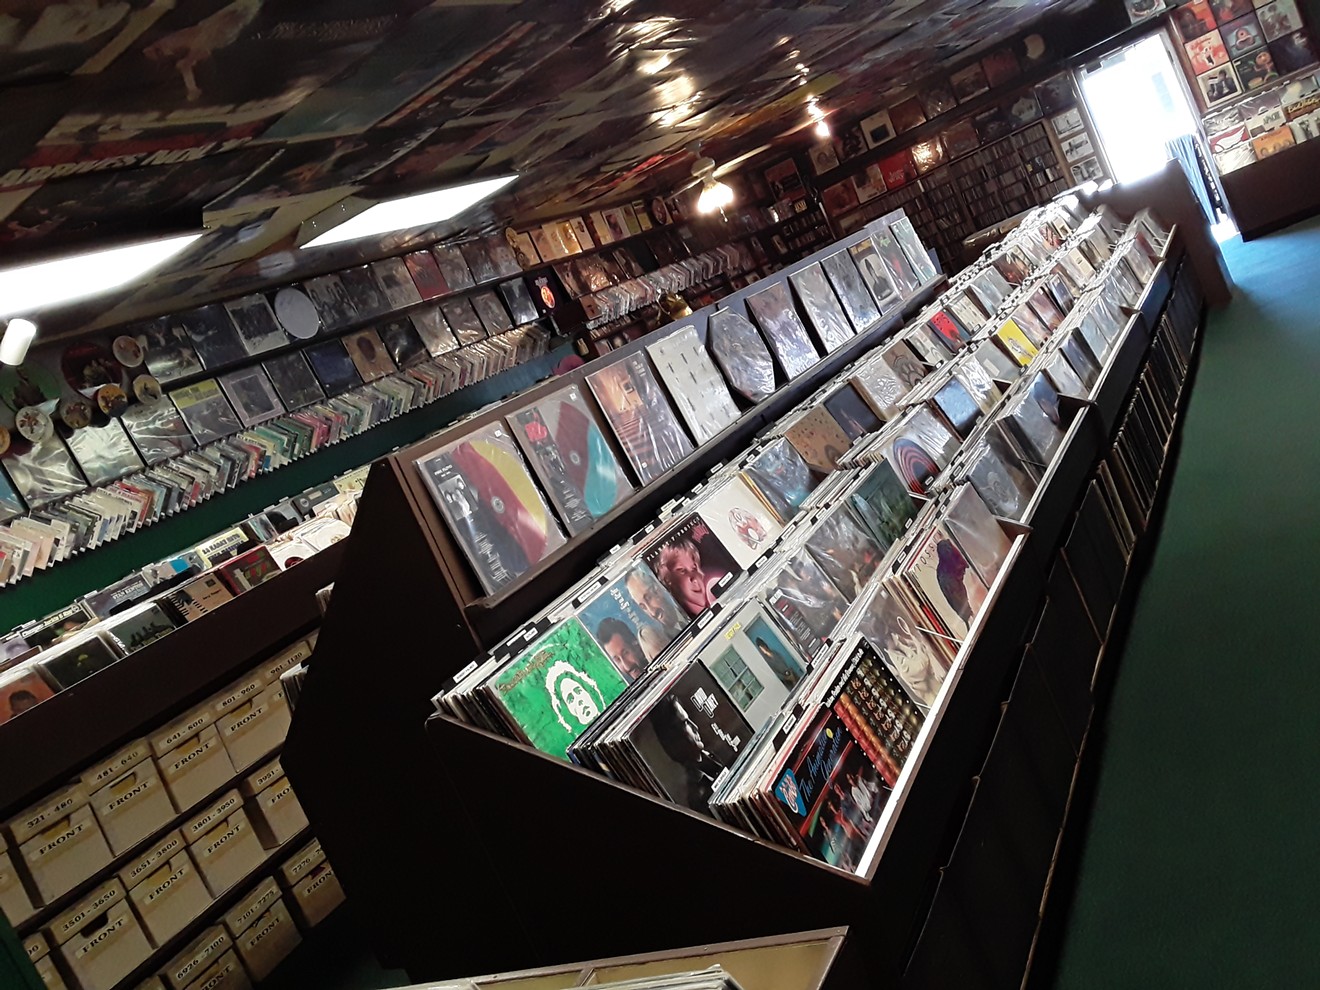 Don't bid farewell to this central Phoenix record store just yet.